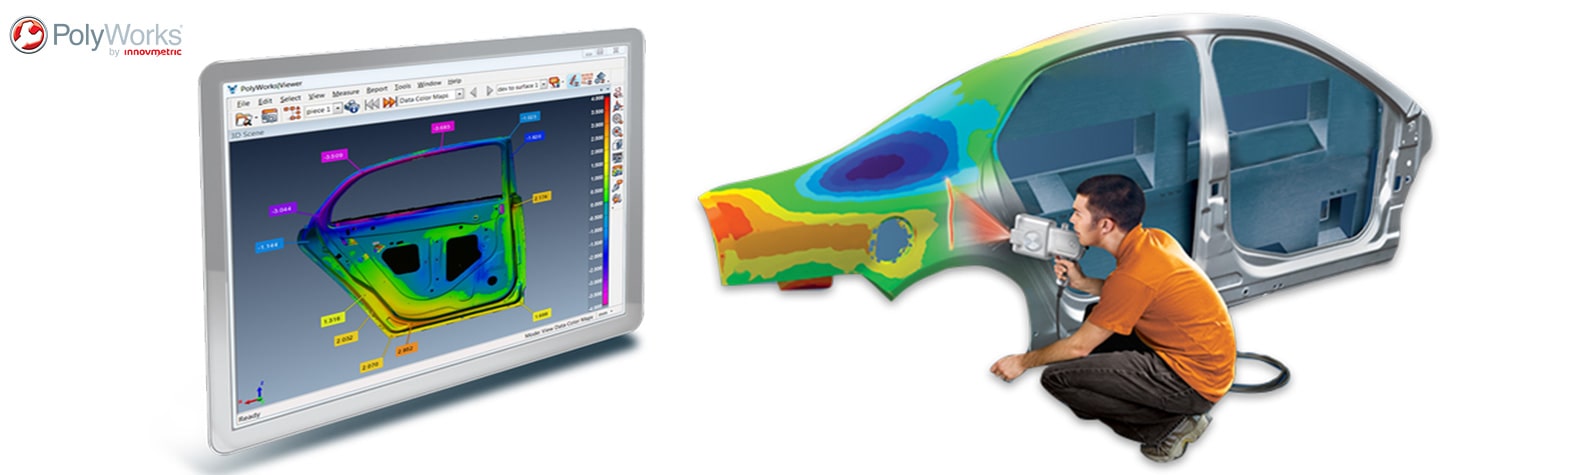 PolyWorks Metrology Inspection Software